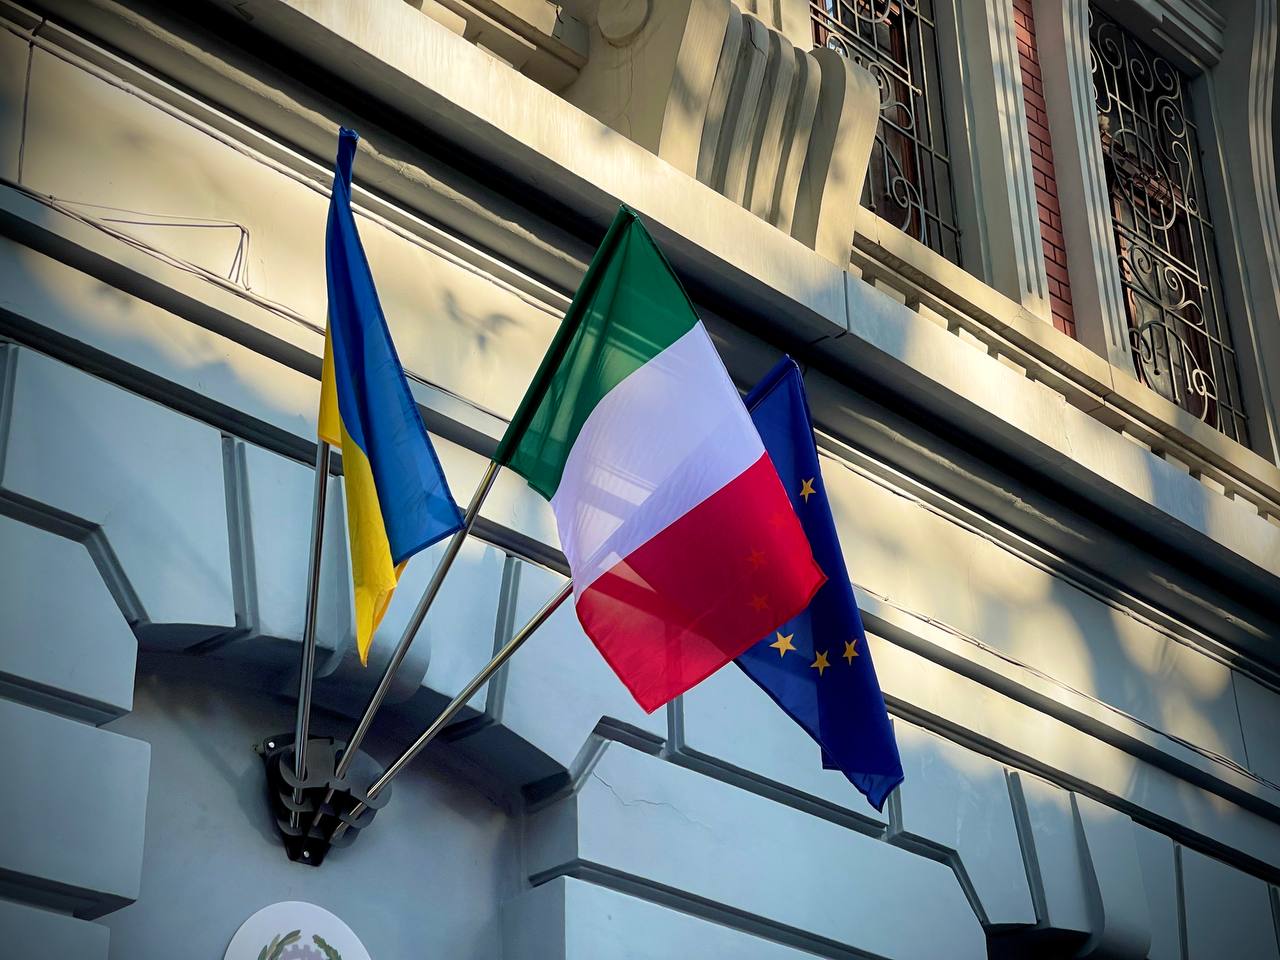 In Odessa, the Honorary Consulate of Italy has been opened